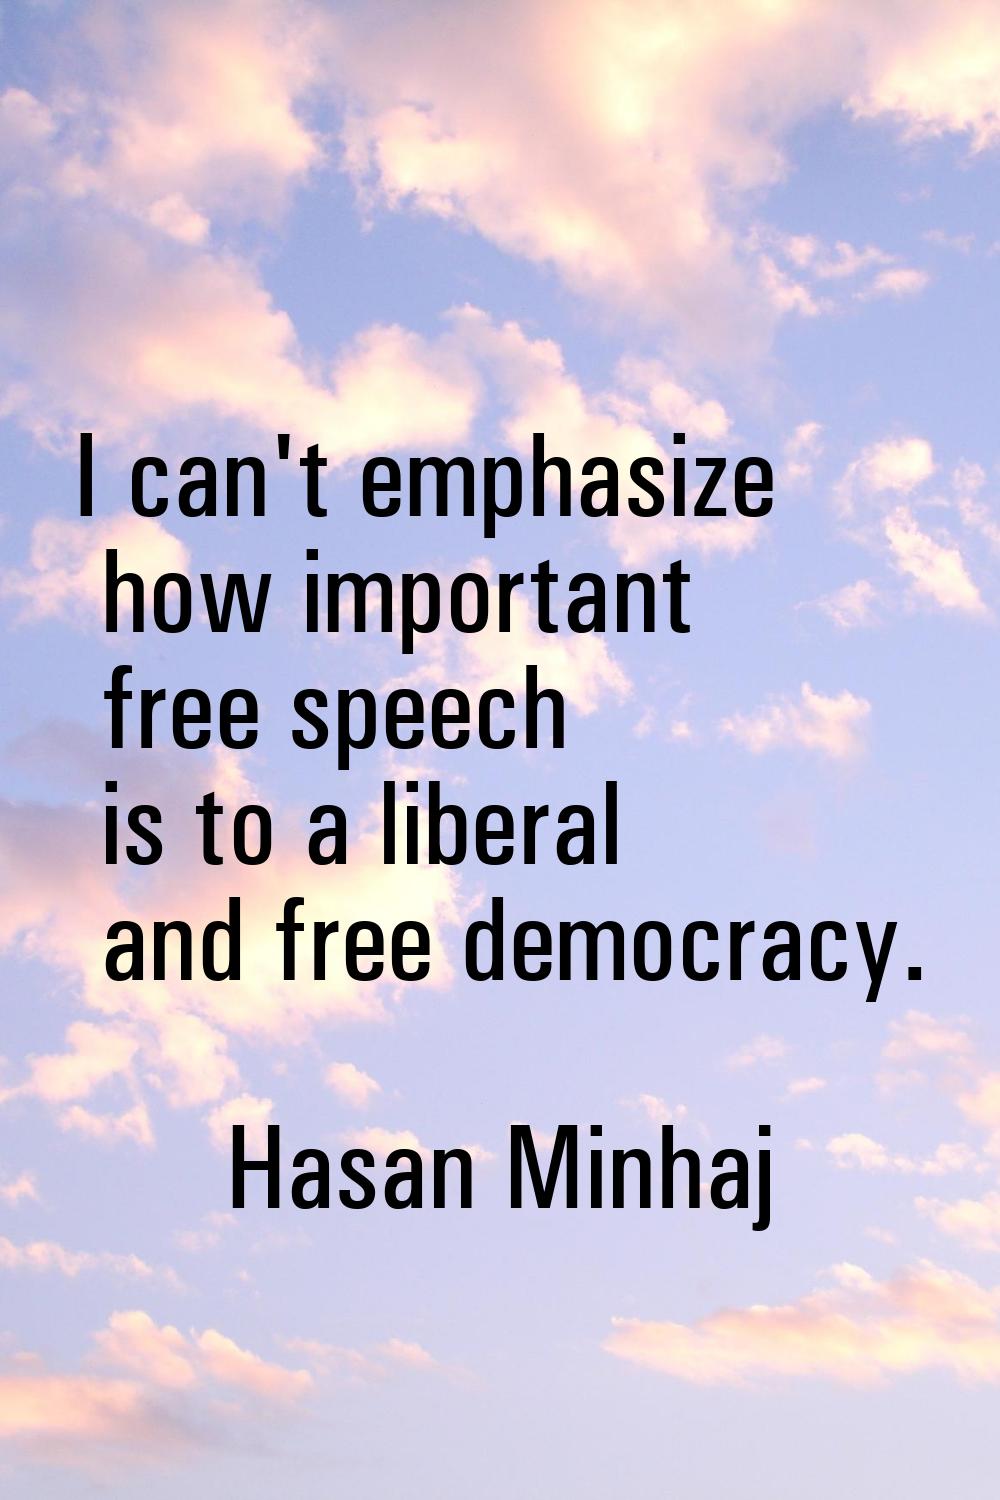 I can't emphasize how important free speech is to a liberal and free democracy.